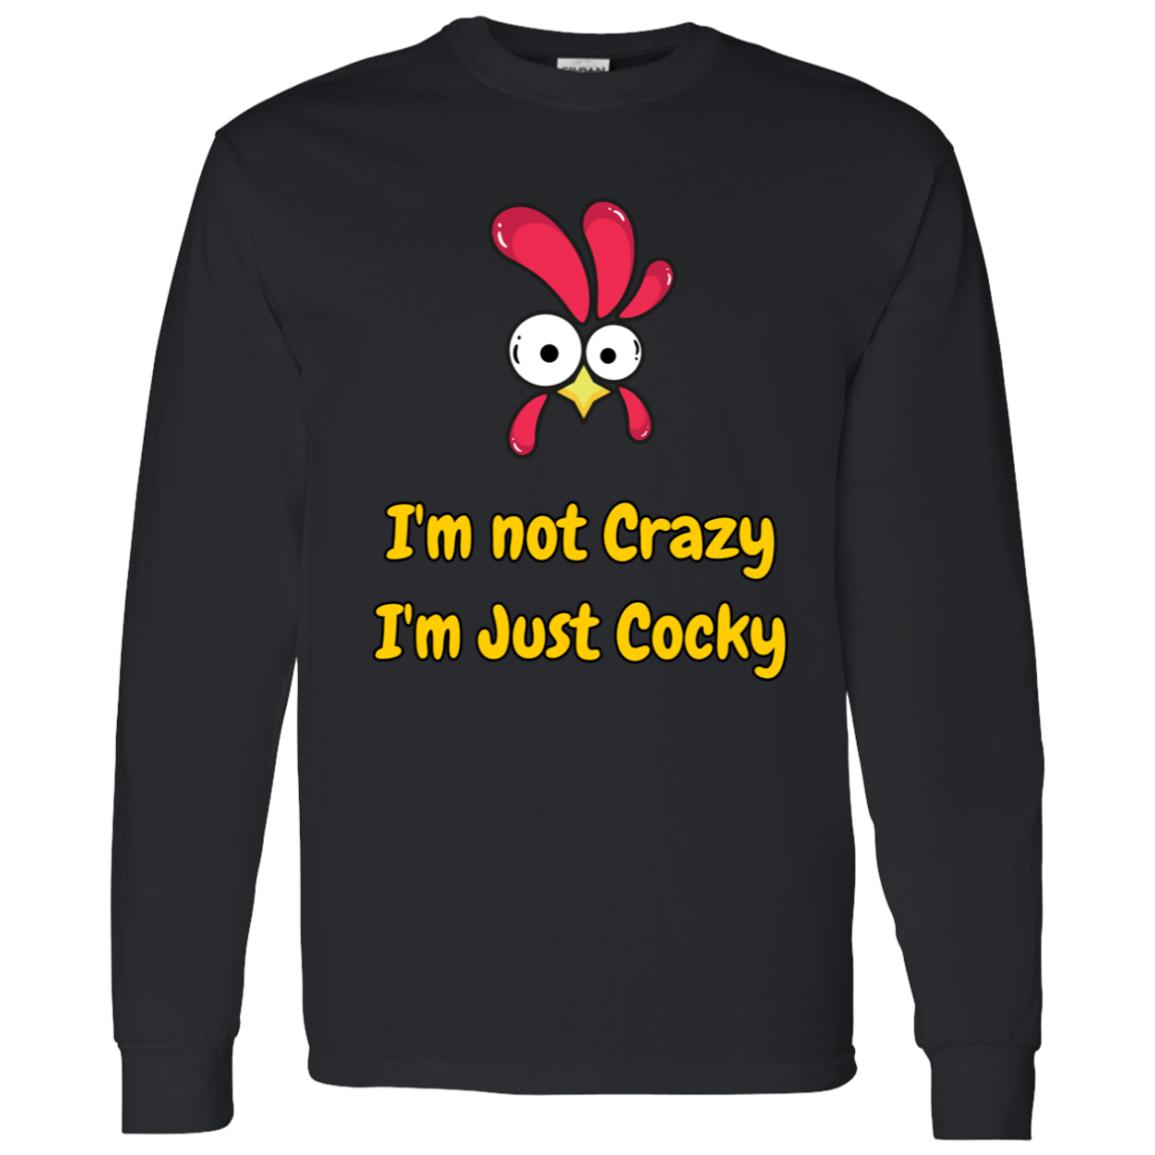 I'm Not Crazy, I'm Just Cocky - Men's Long-Sleeve T-Shirt